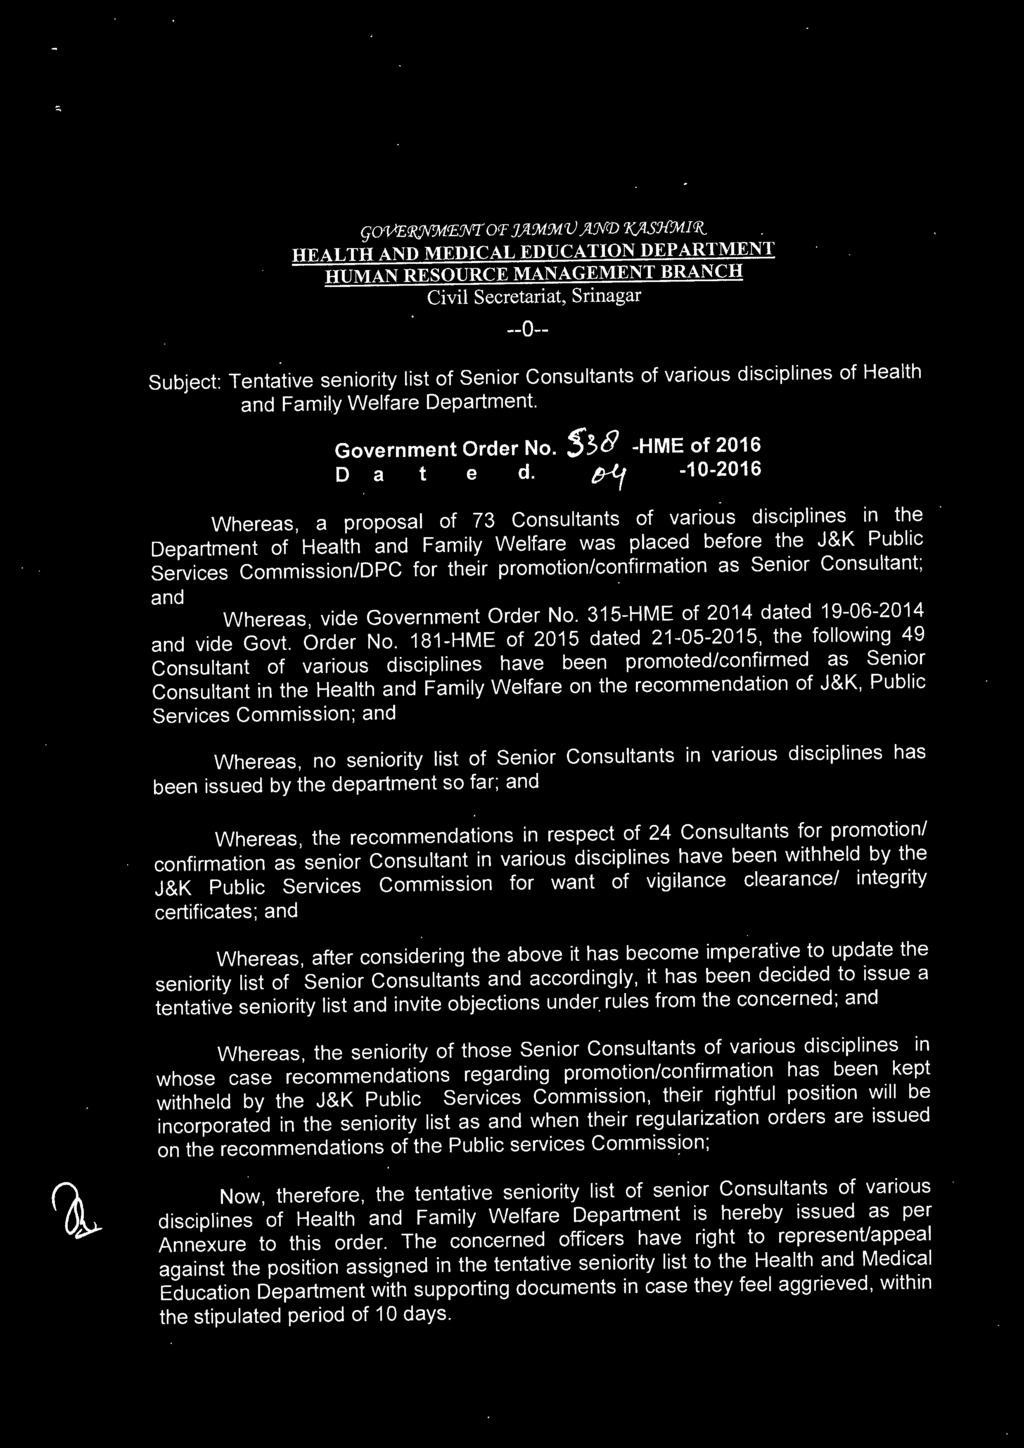 31S-HME of 2014 dated 19-06-2014 and vide Govt. Order No.